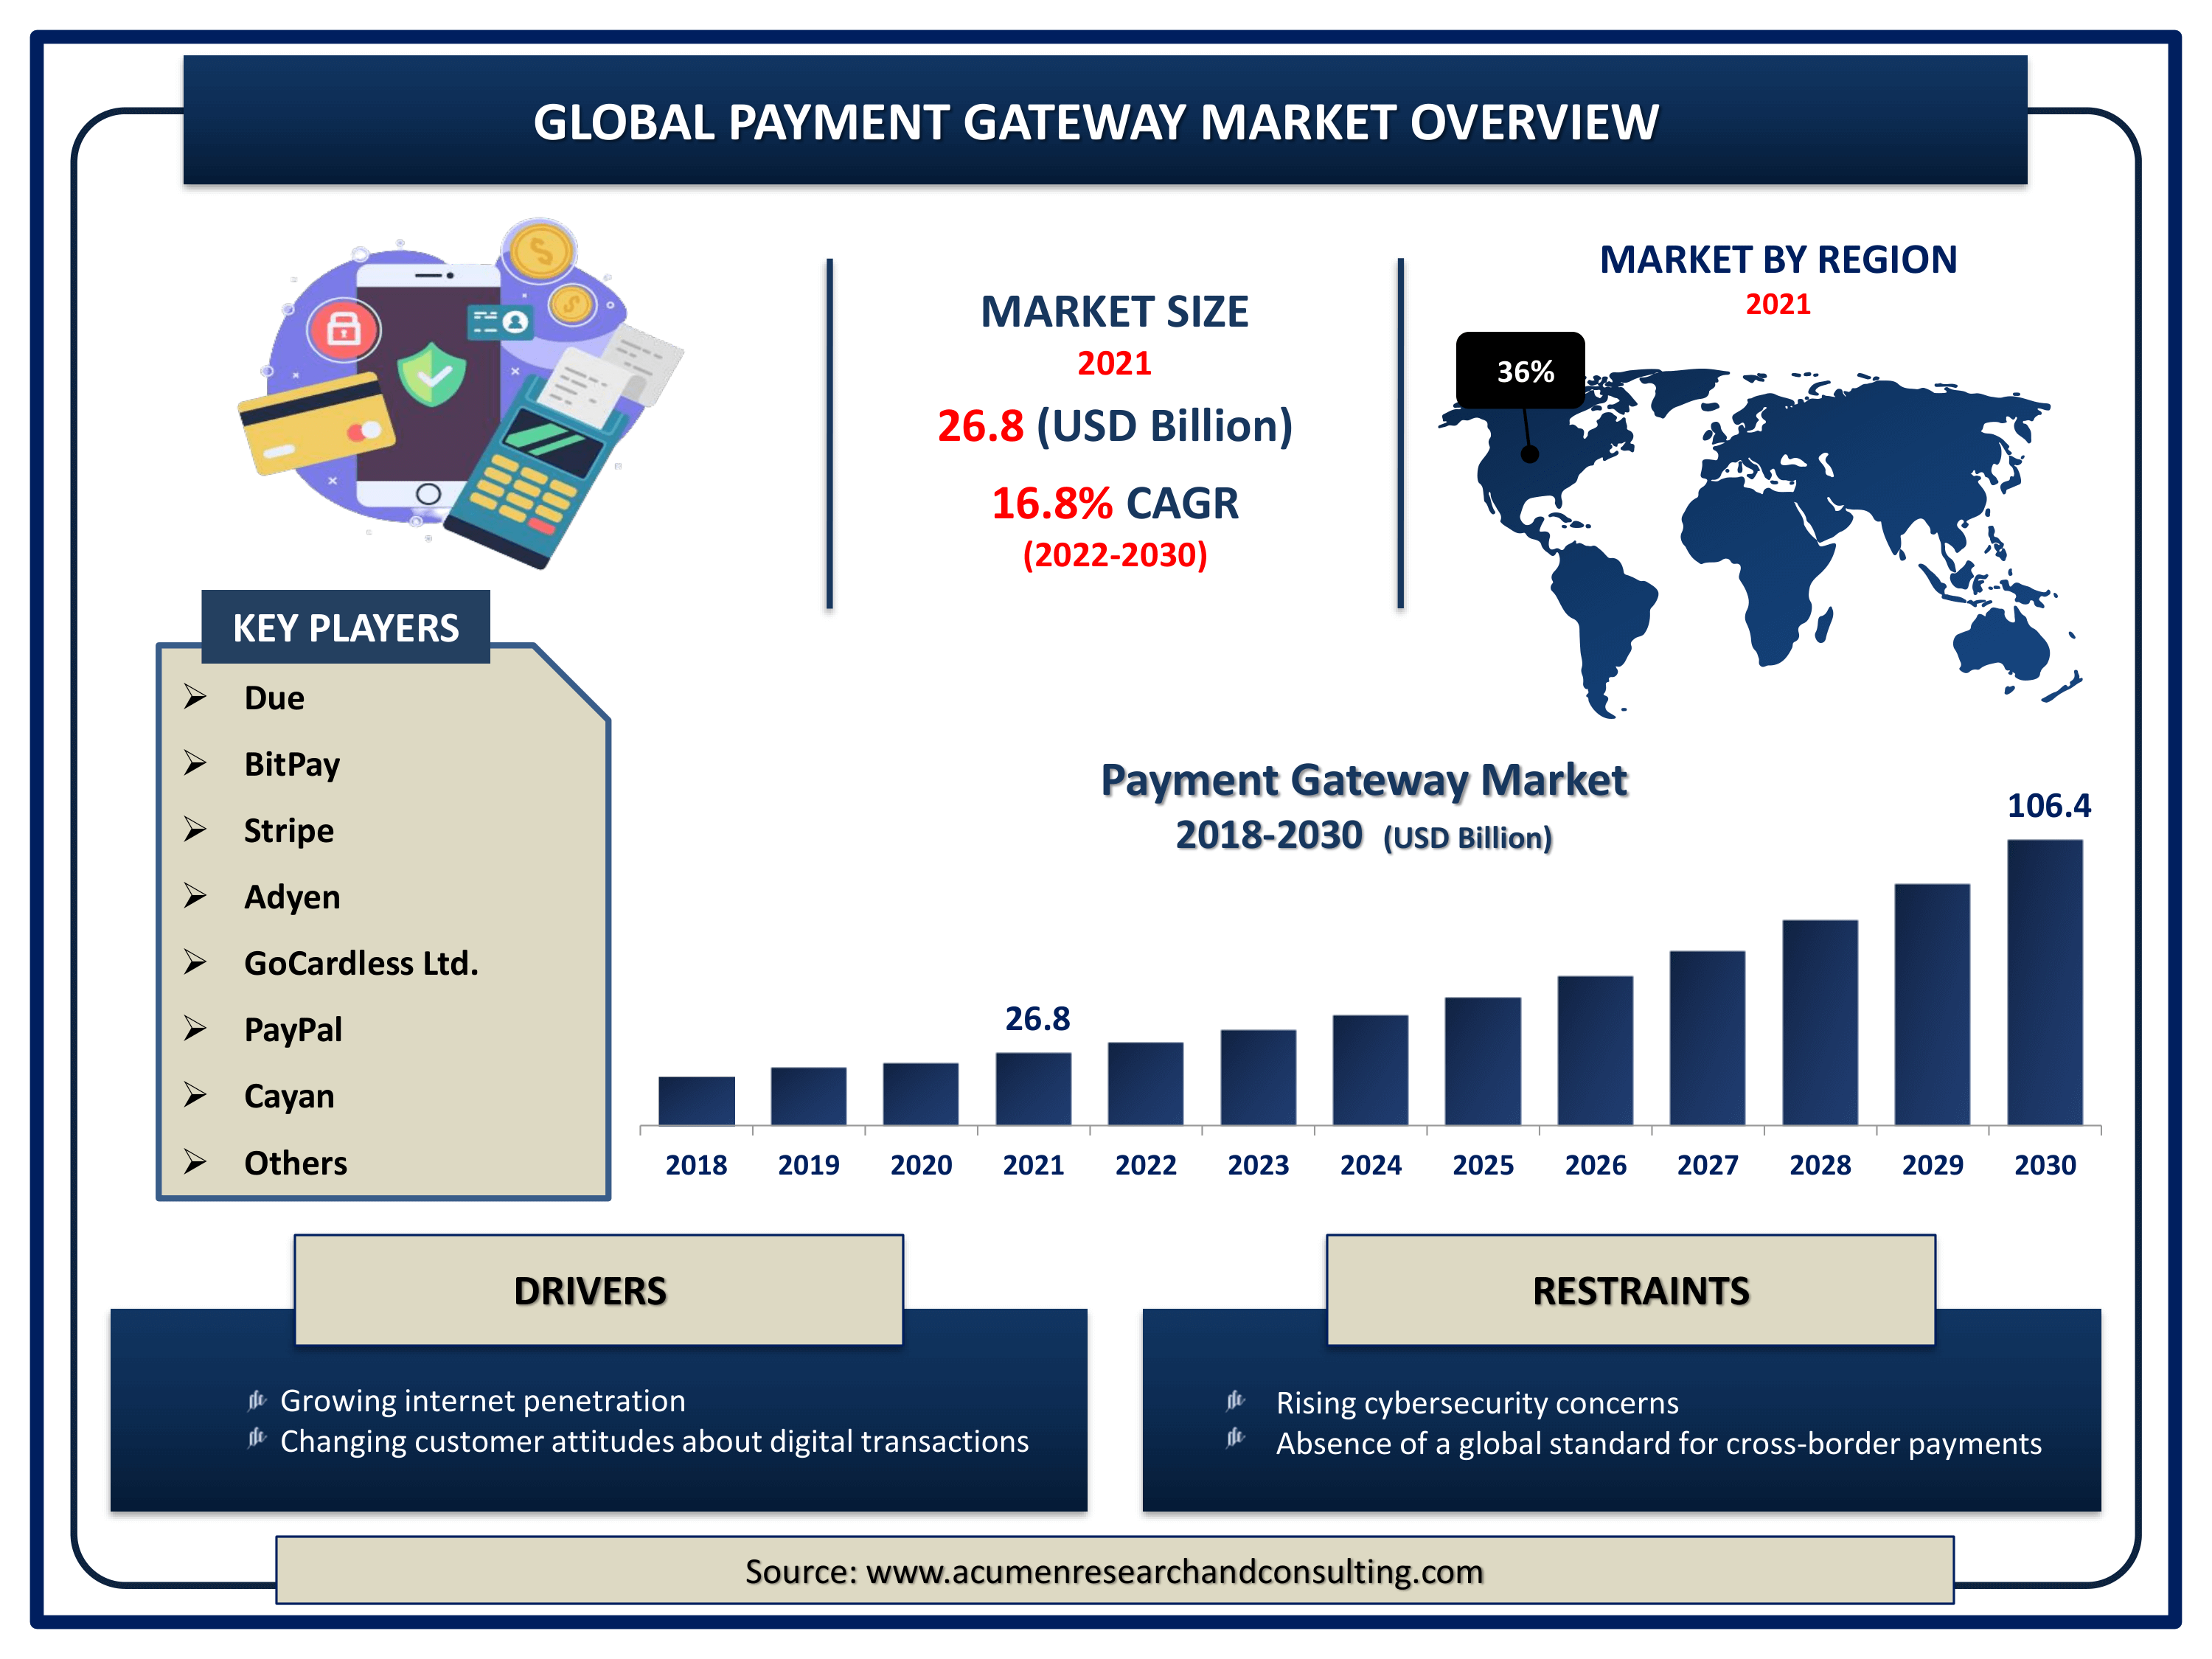 Global payment gateway market revenue is expected to increase by USD 106.4 billion by 2030, with a 16.8% CAGR from 2022 to 2030